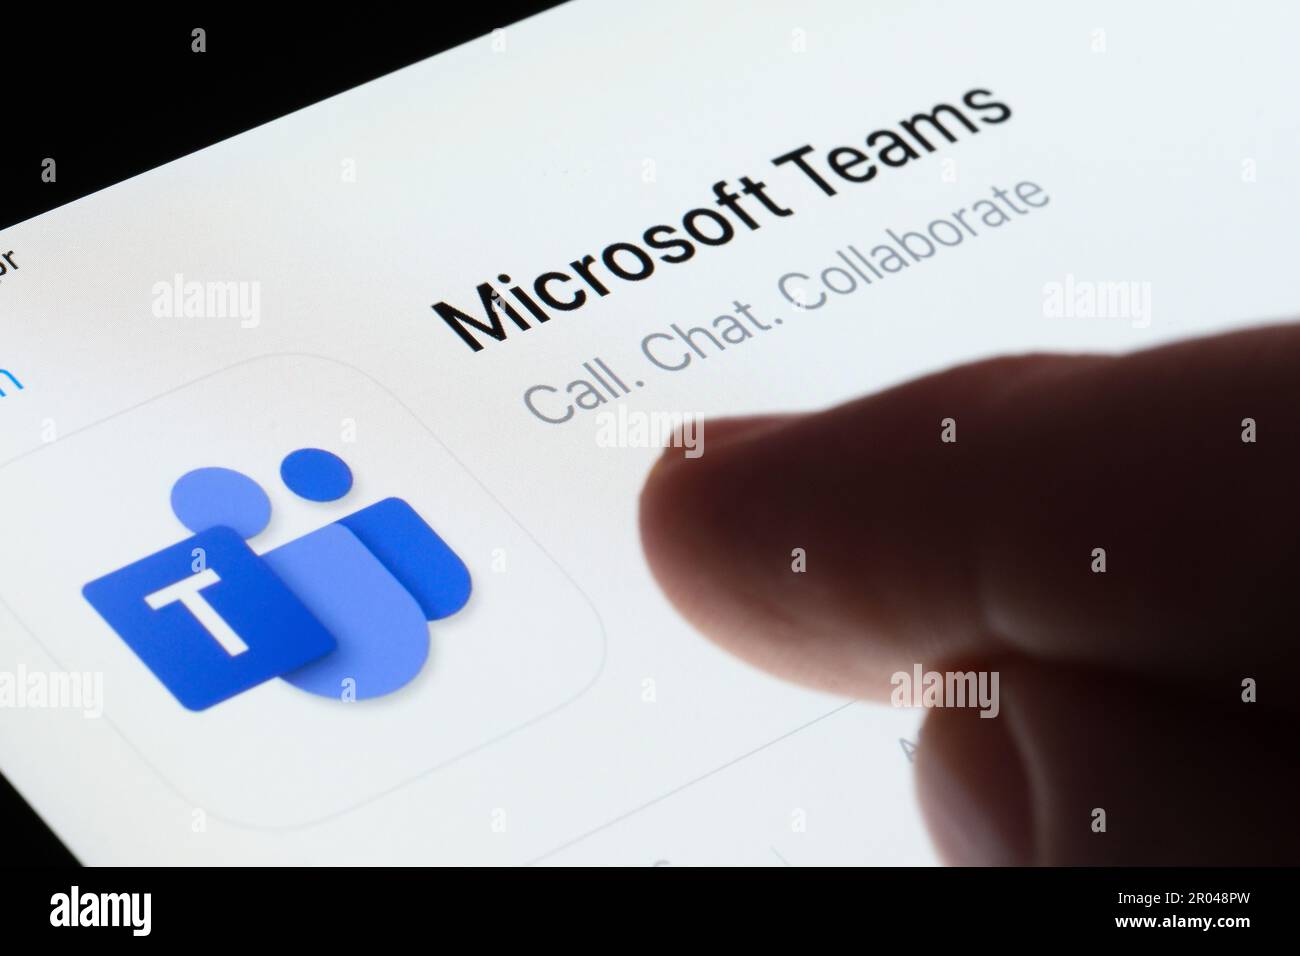 Microsoft Teams app seen in App Store on the screen of ipad and blurred finger pointing at it. Selective focus. Stafford, United Kingdom, May 6, 2023 Stock Photo